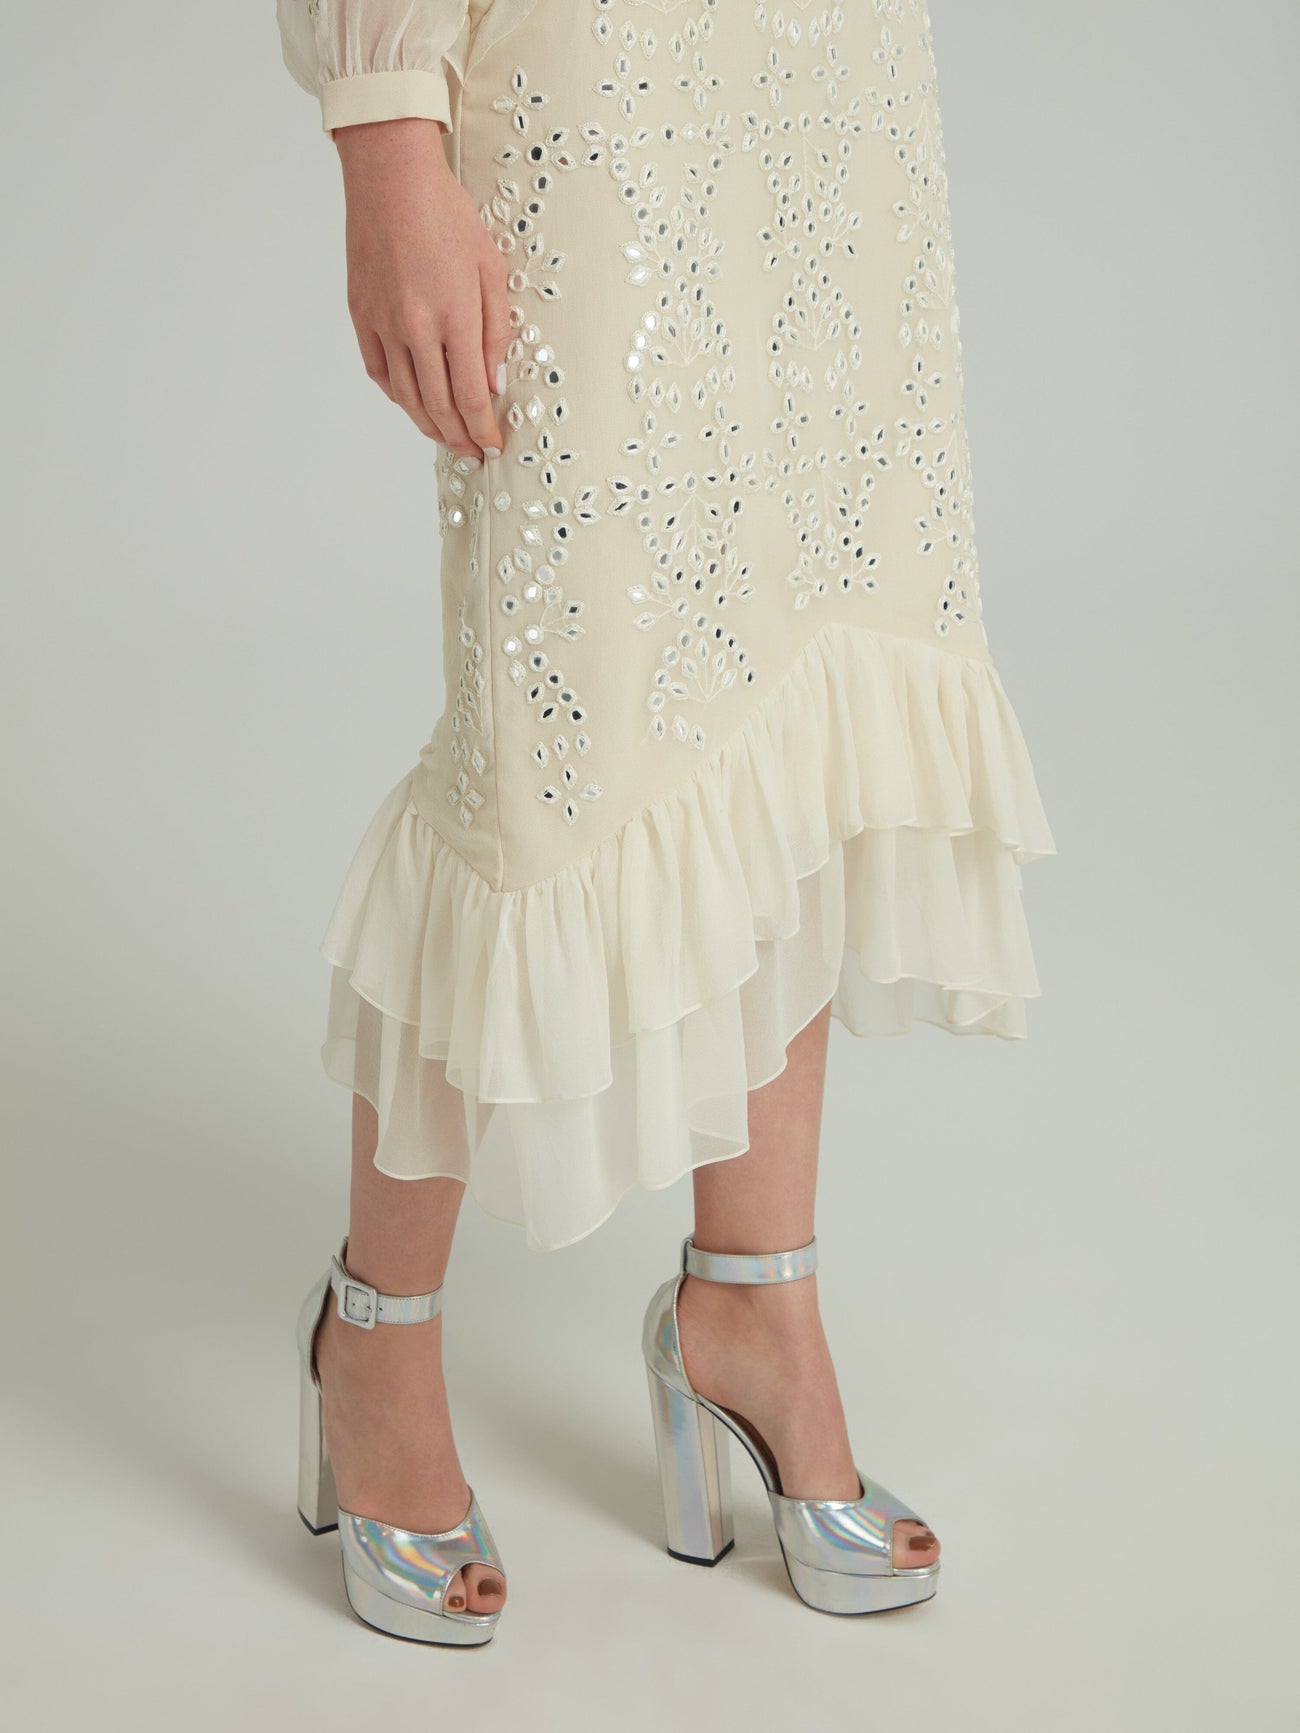 Load image into Gallery viewer, Venyx Isa Silk B Dress in Ivory Mirror Embroidery